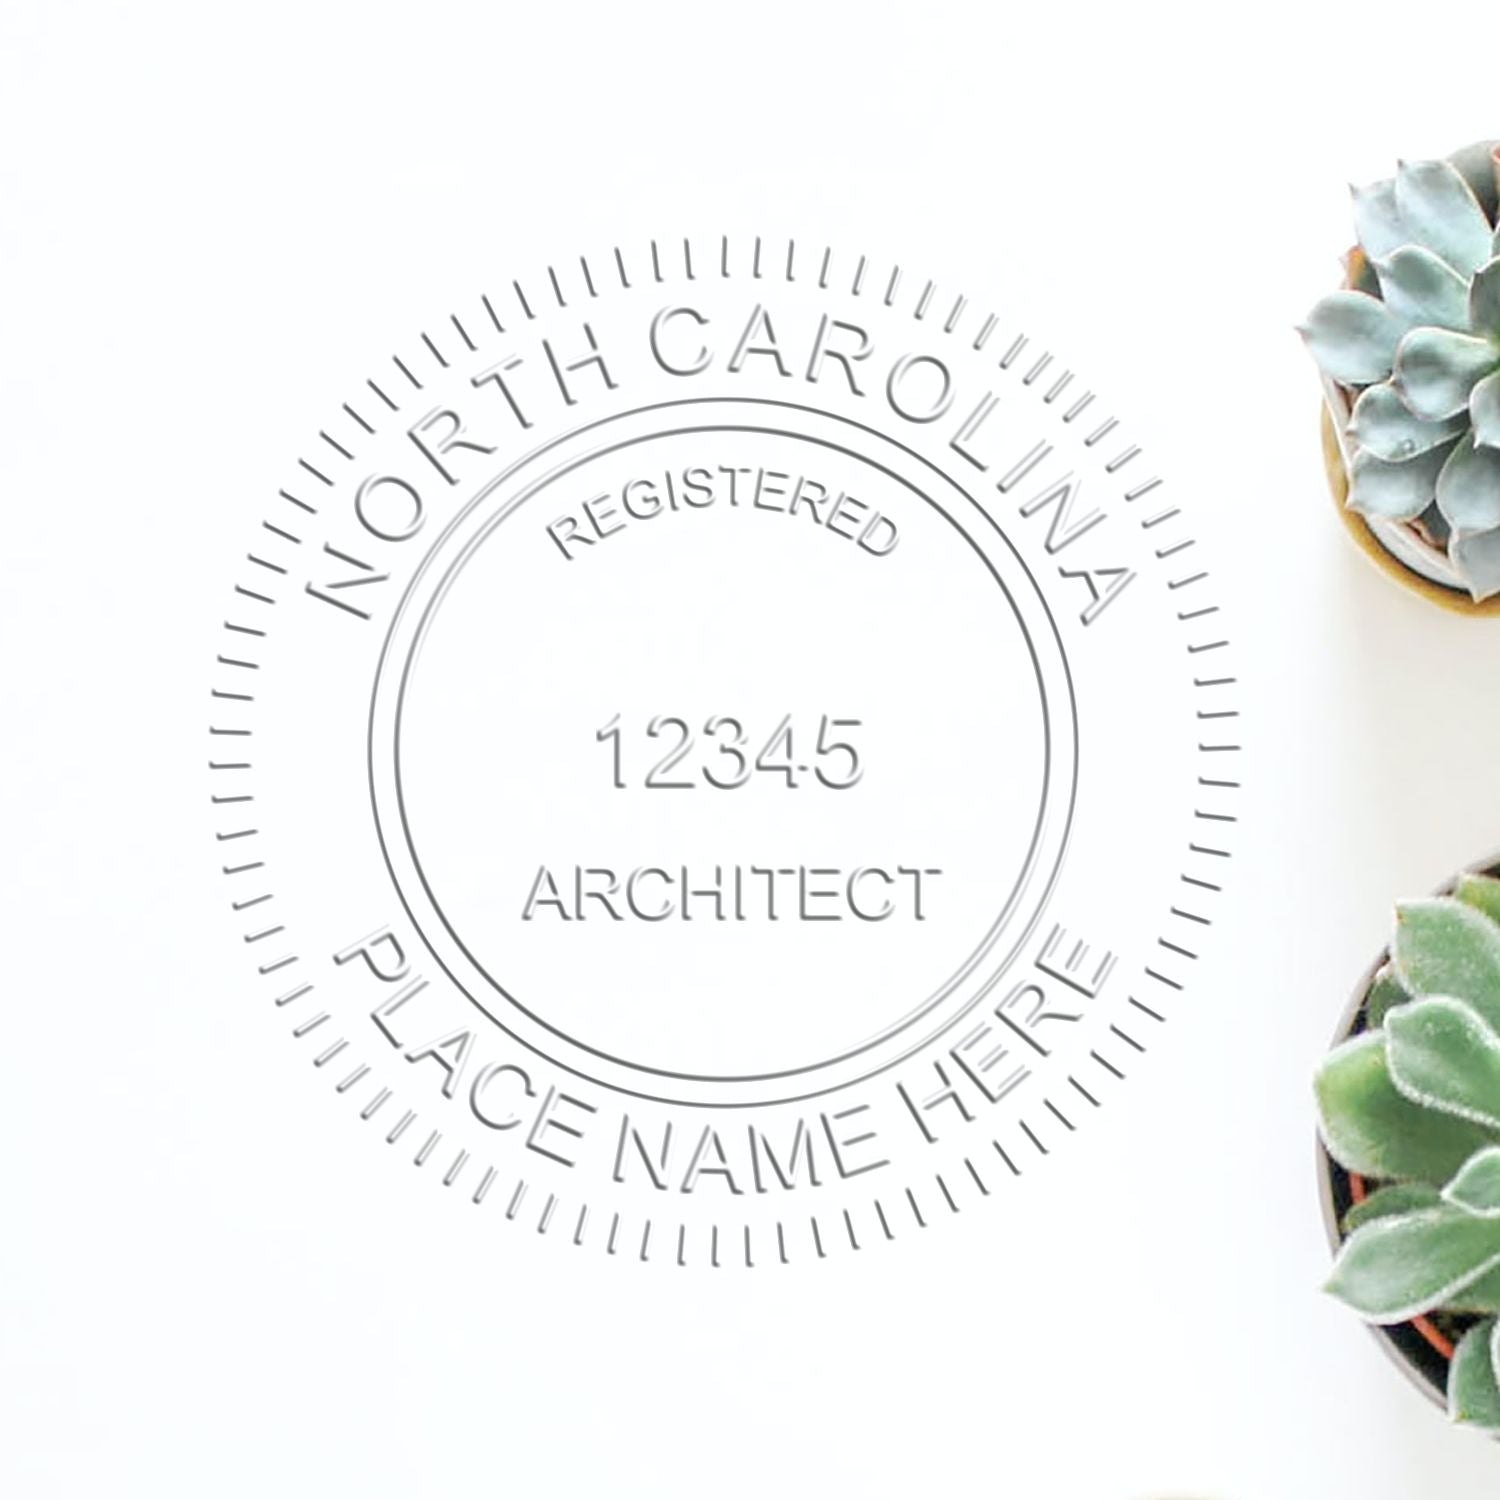 The Gift North Carolina Architect Seal stamp impression comes to life with a crisp, detailed image stamped on paper - showcasing true professional quality.